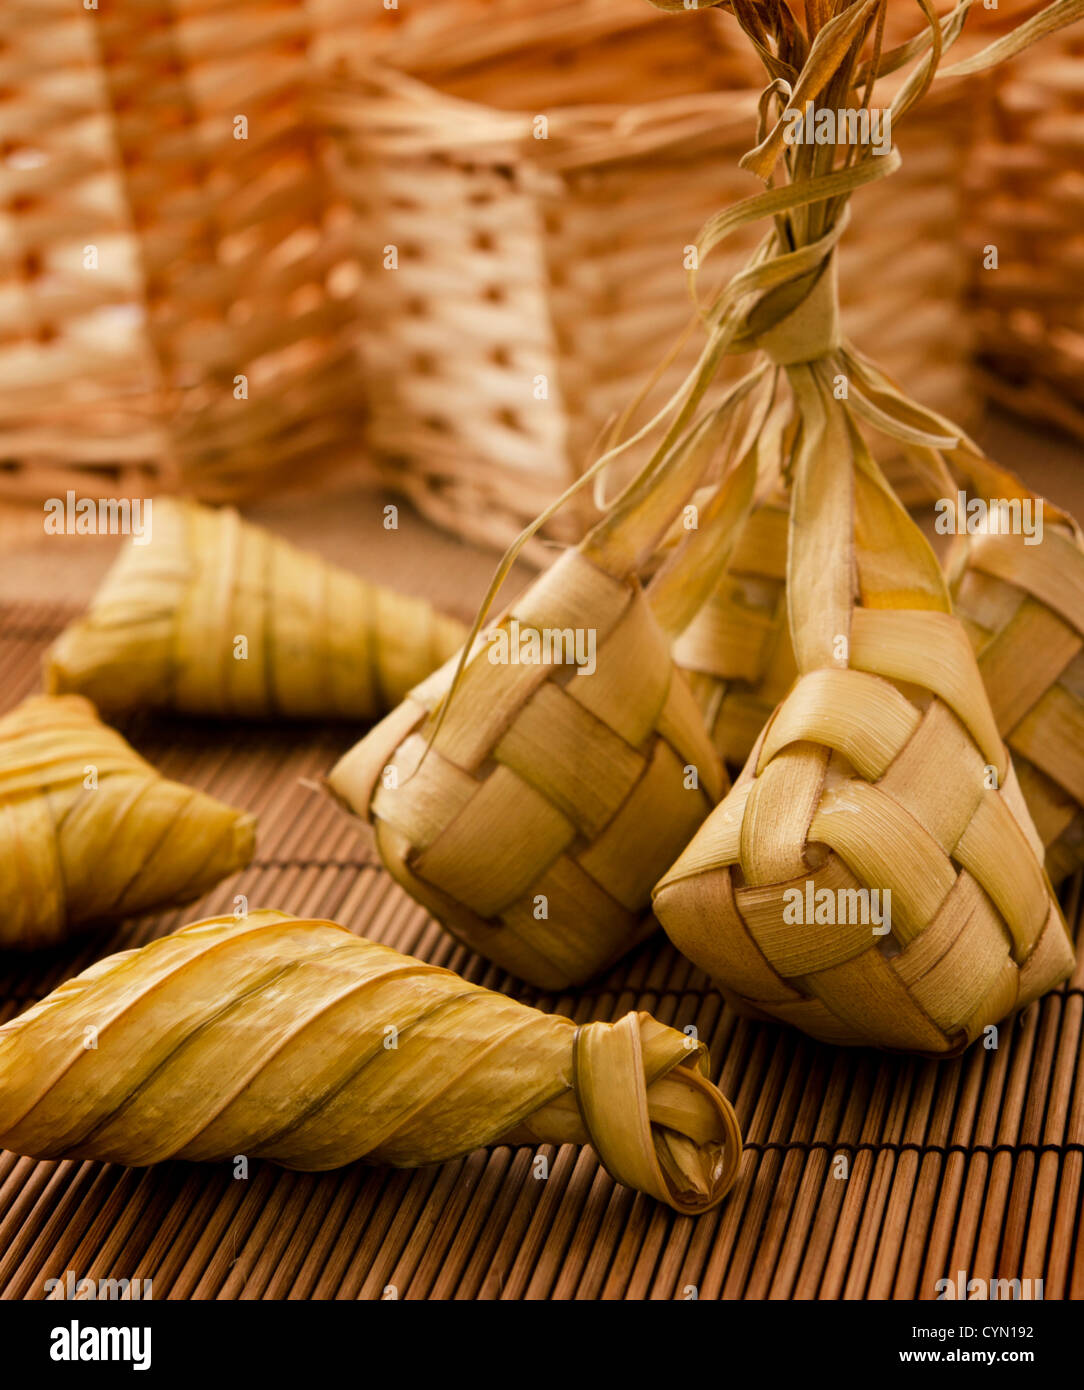 Asian cuisine ketupat or packed rice in low light setting. Stock Photo